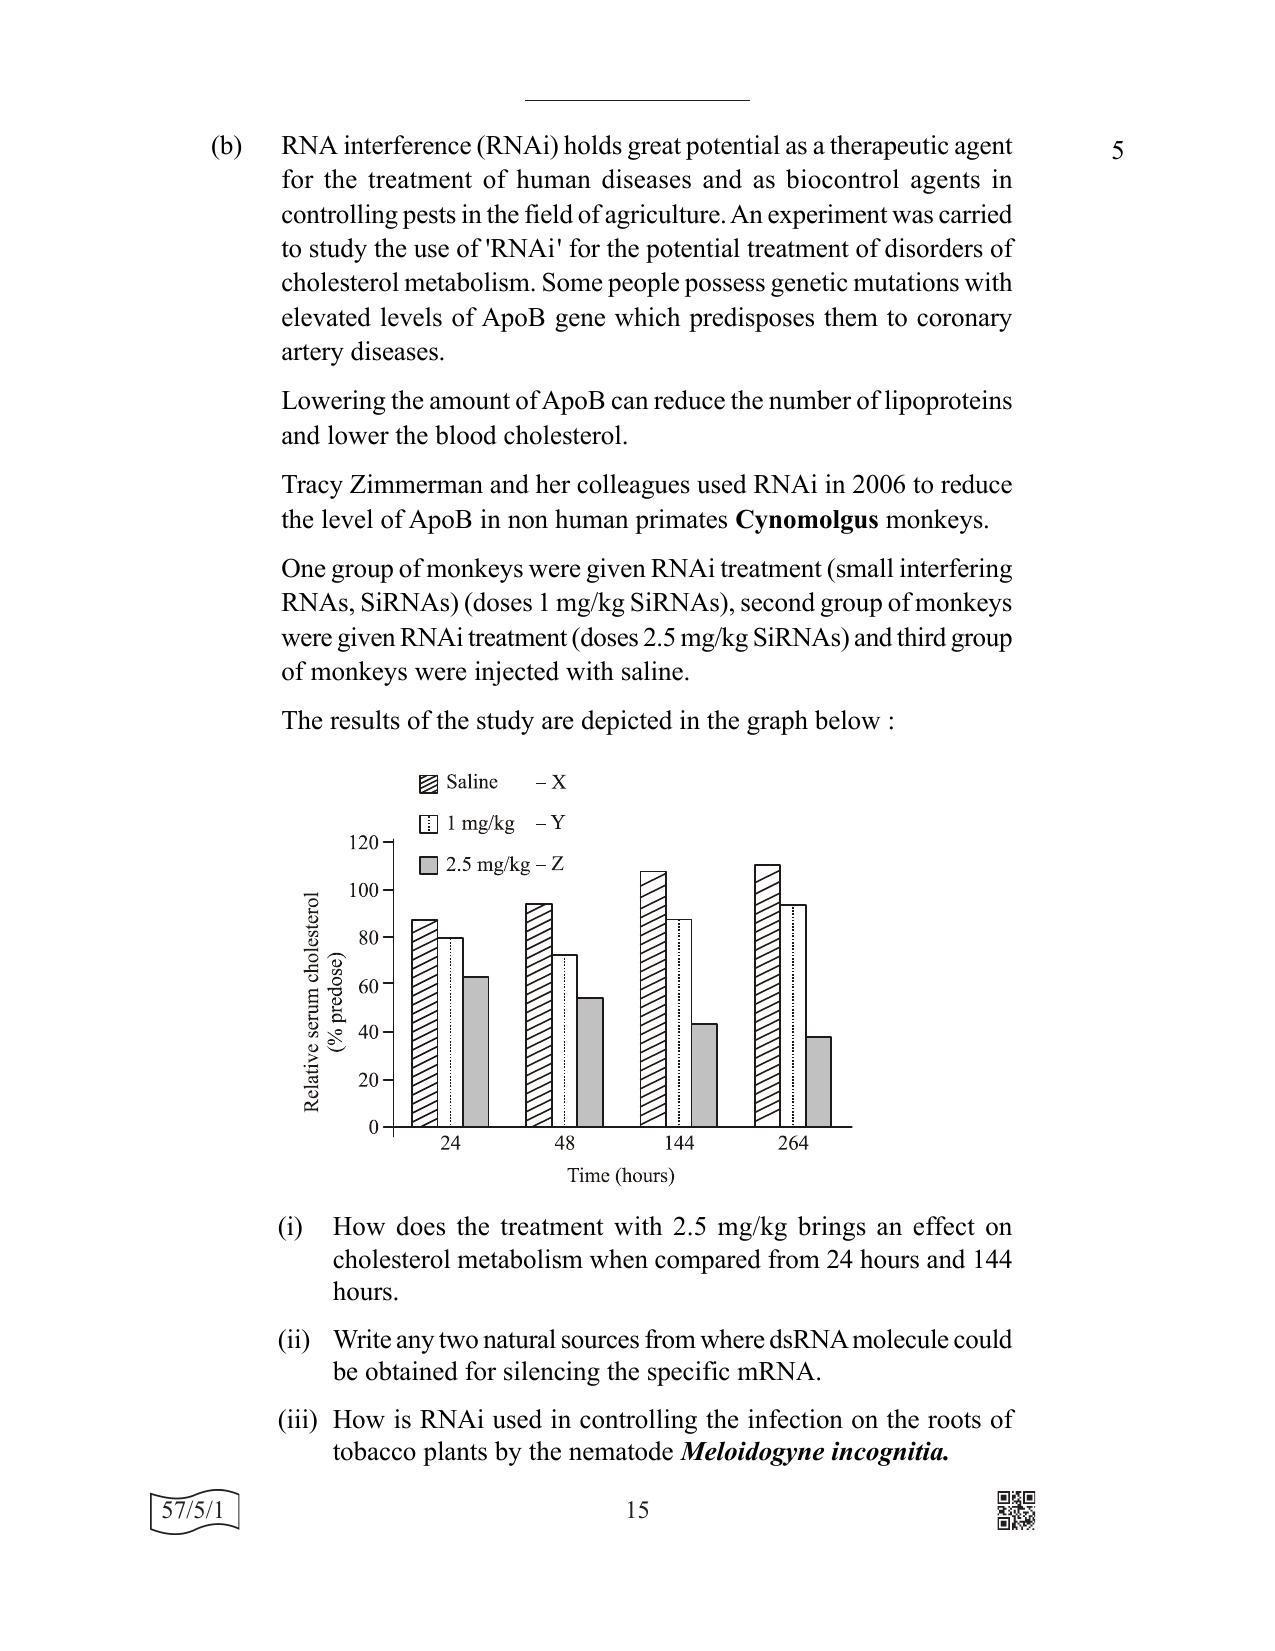 CBSE Class 12 57-5-1 Biology 2022 Question Paper - Page 15